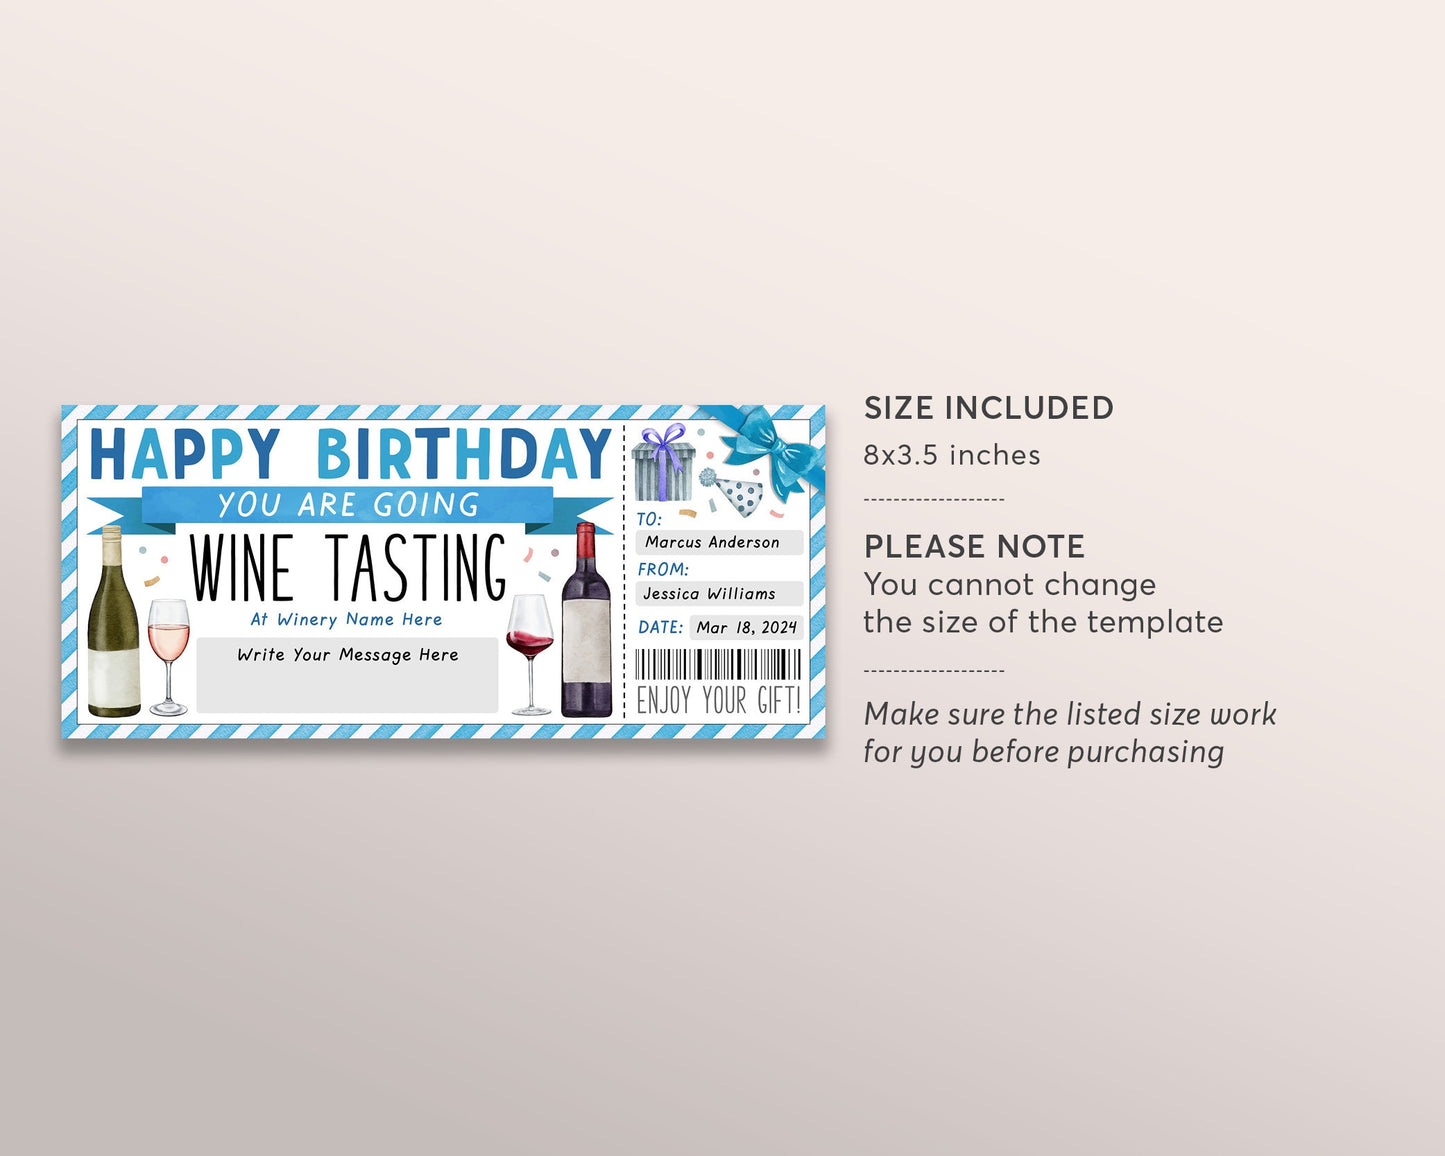 Wine Tasting Gift Voucher Editable Template, Birthday Surprise Wine Tasting Ticket Gift Certificate For Him, Winery Vineyard Coupon Reveal